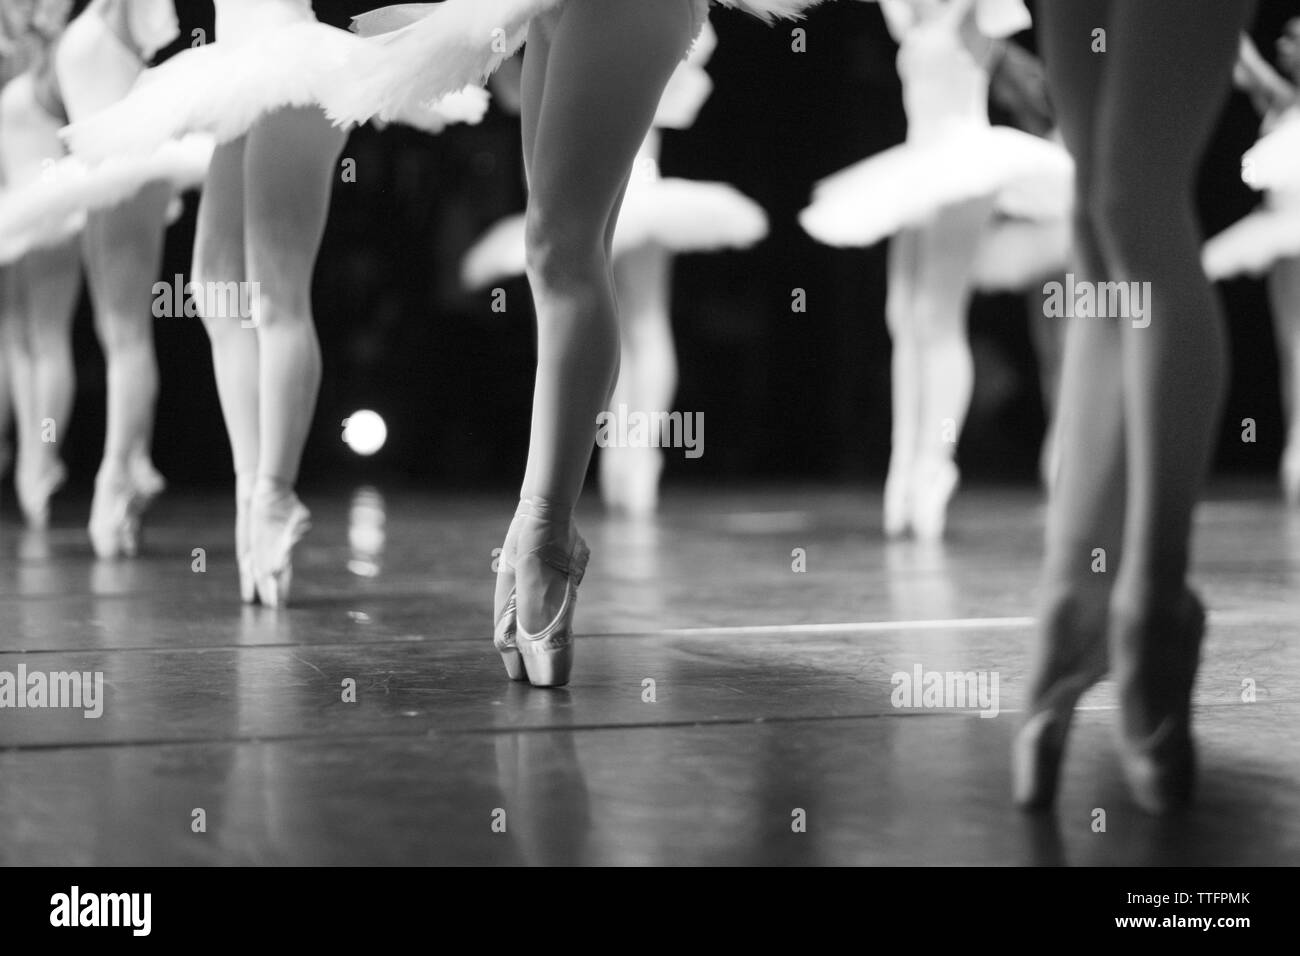 Group ballerinas Black and White Stock Photos & Images - Alamy